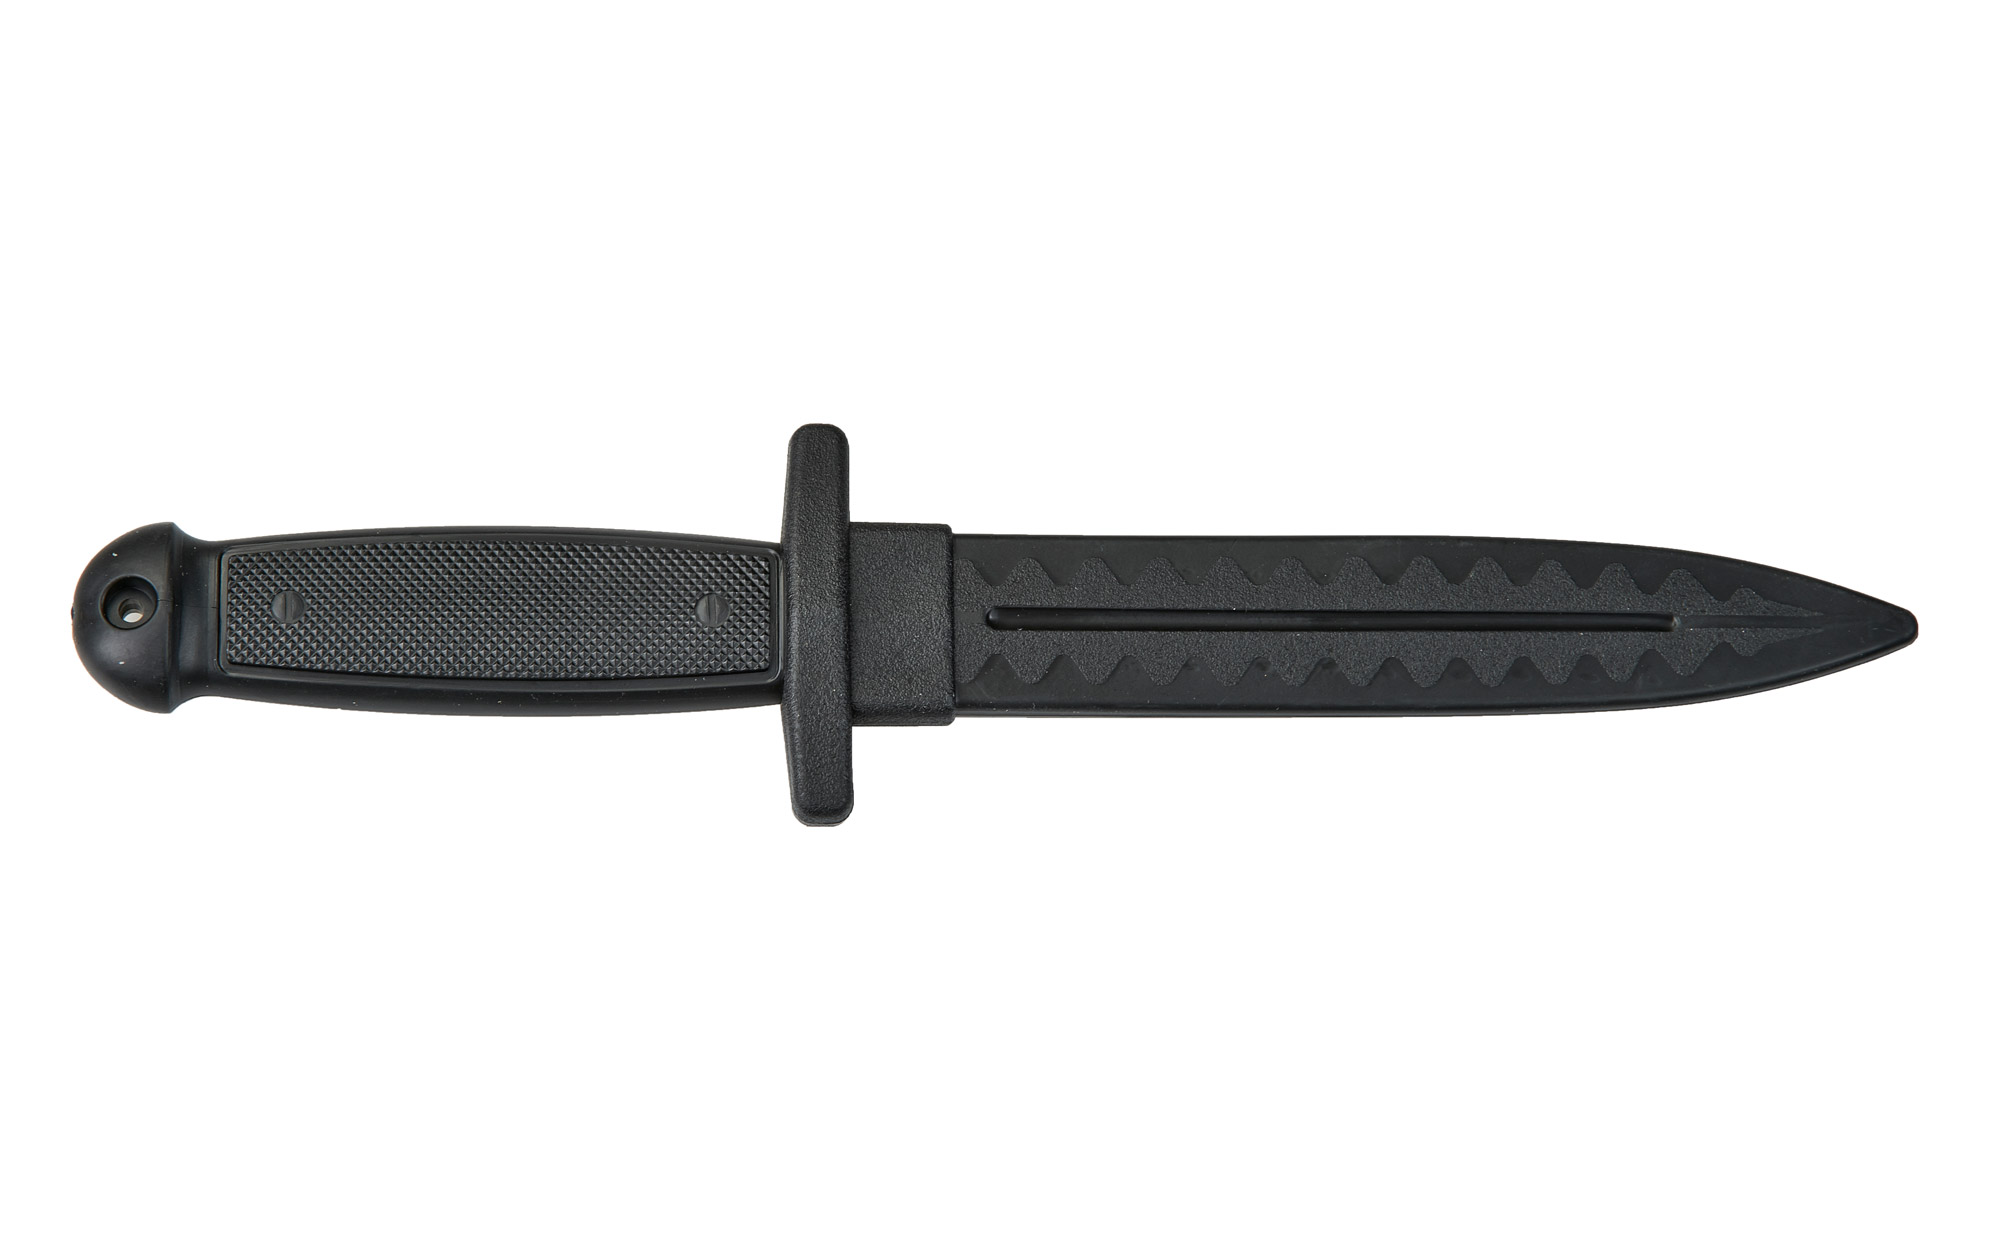 Training knife made of TPR (flexible)